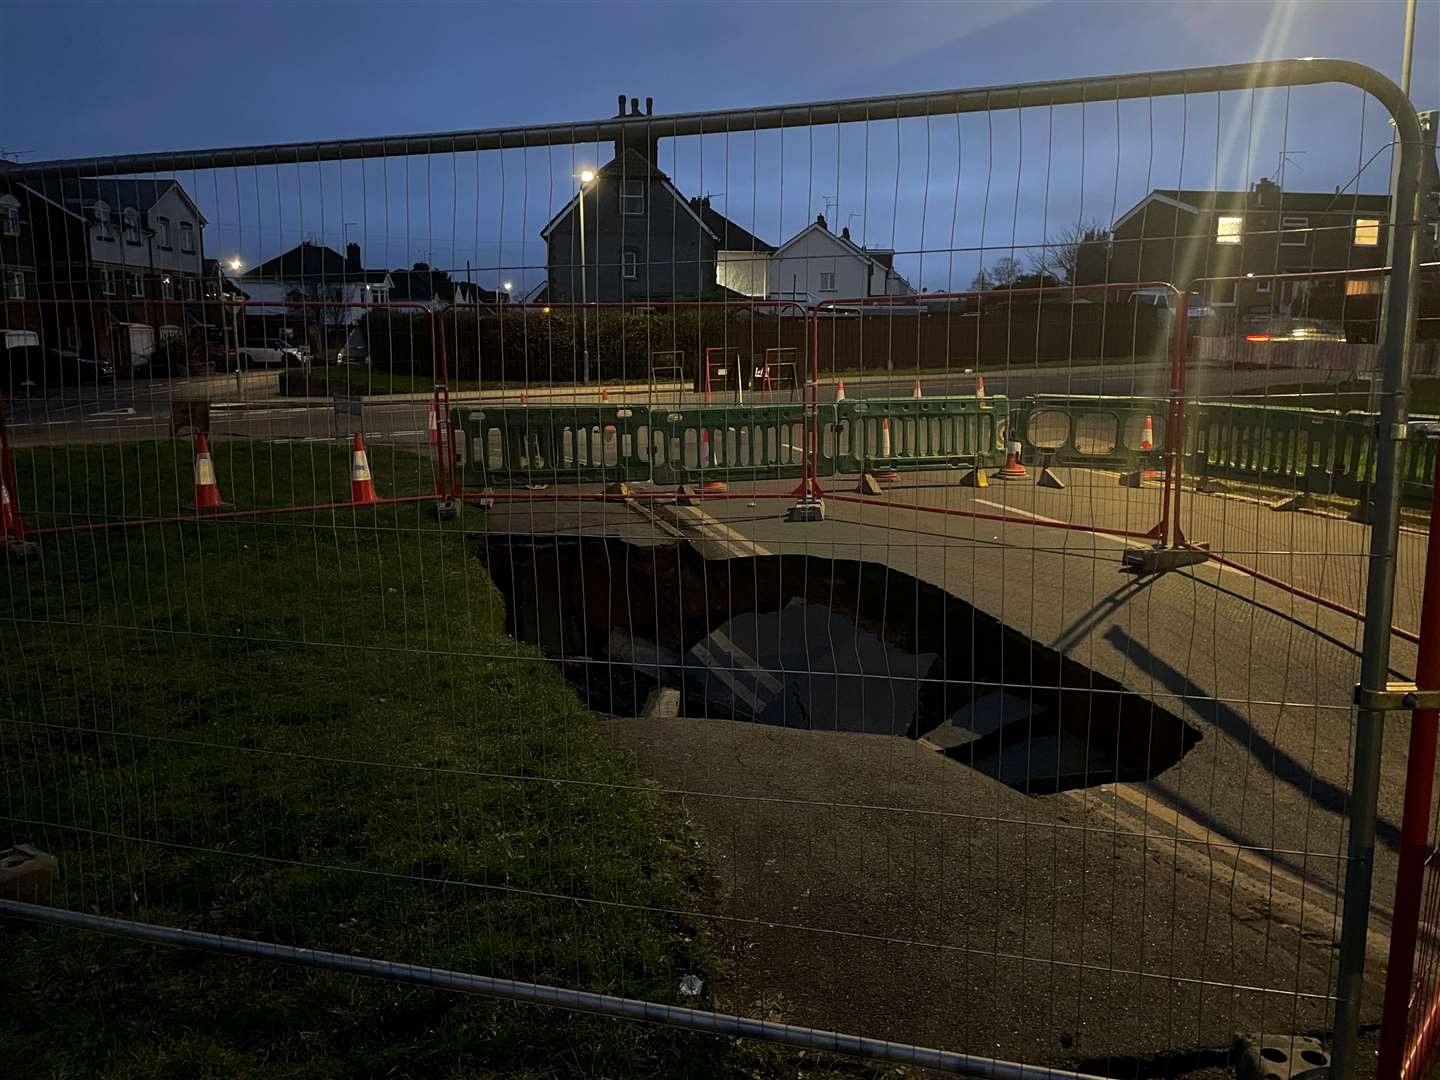 The sinkhole at the Farleigh Lane junction